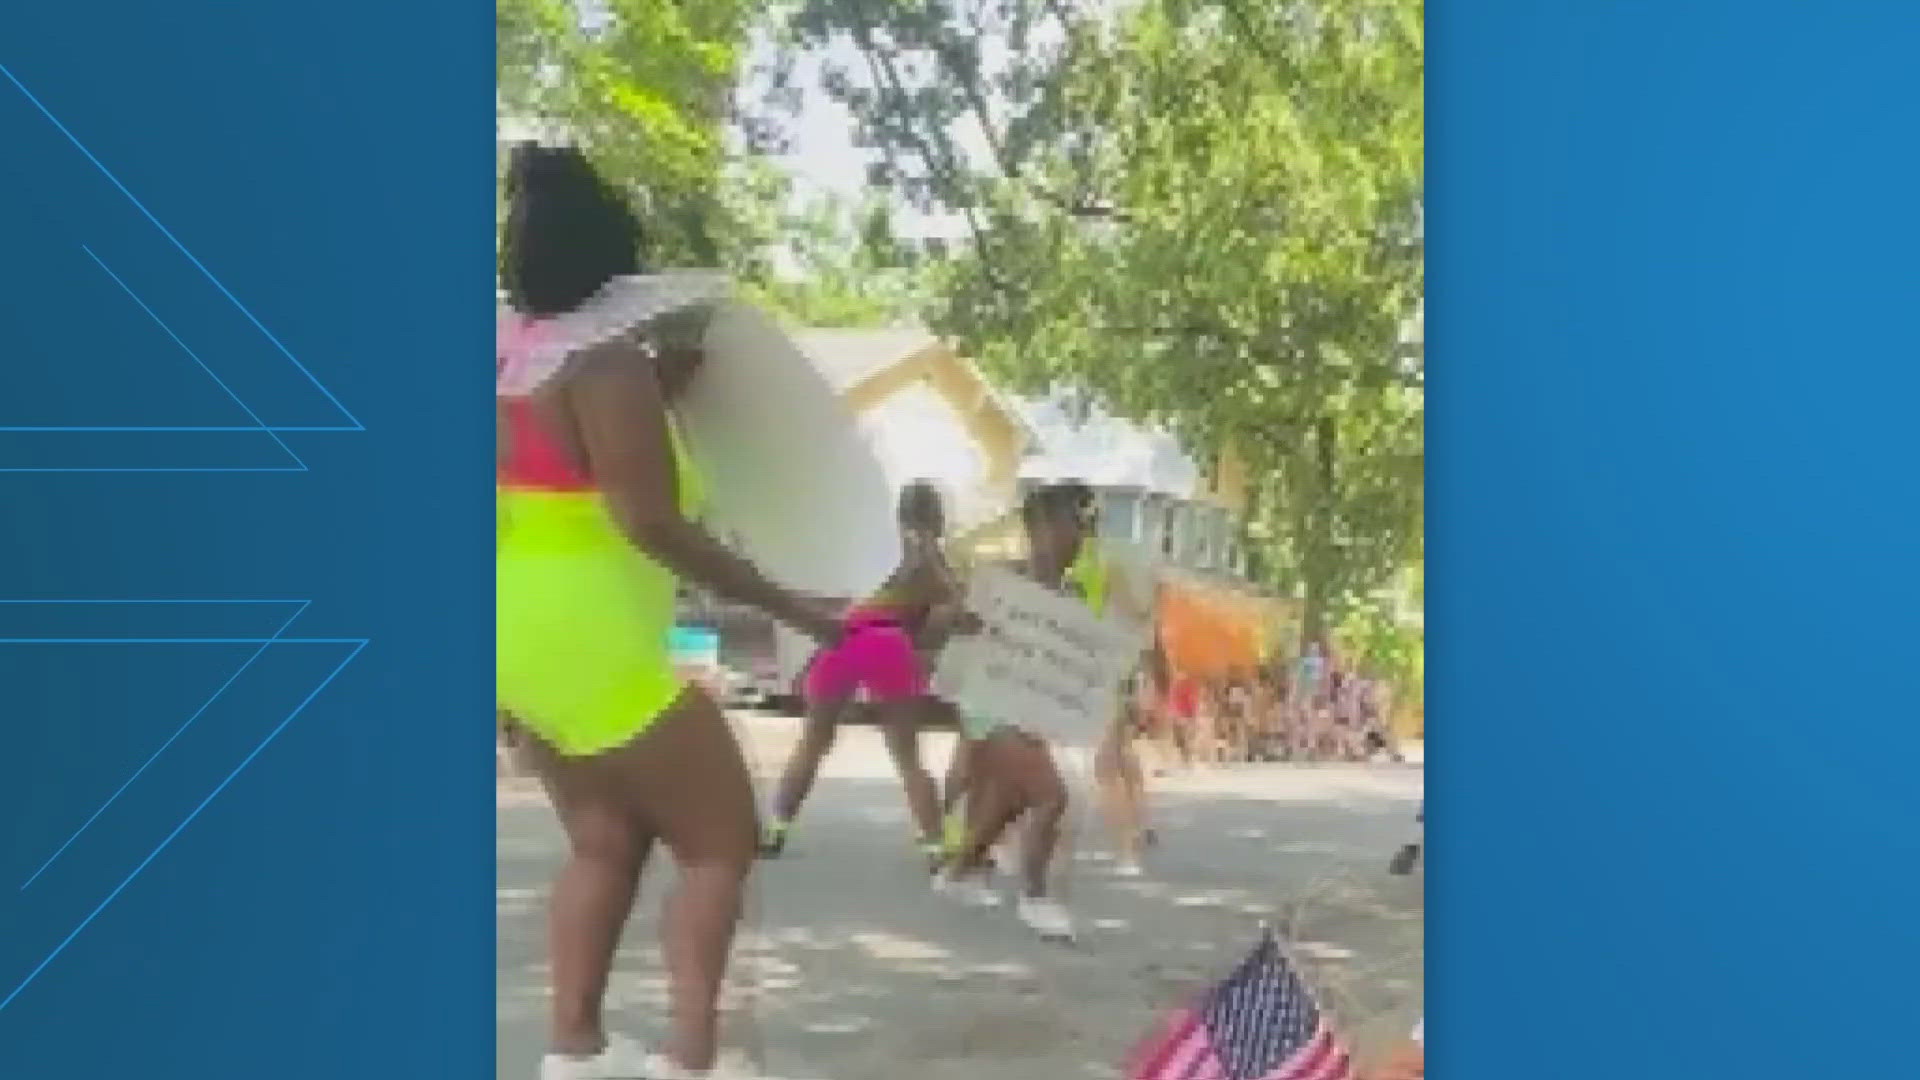 A horse that was part of a Takoma Park Independence Day parade escaped during the procession, according to Takoma Park Police.